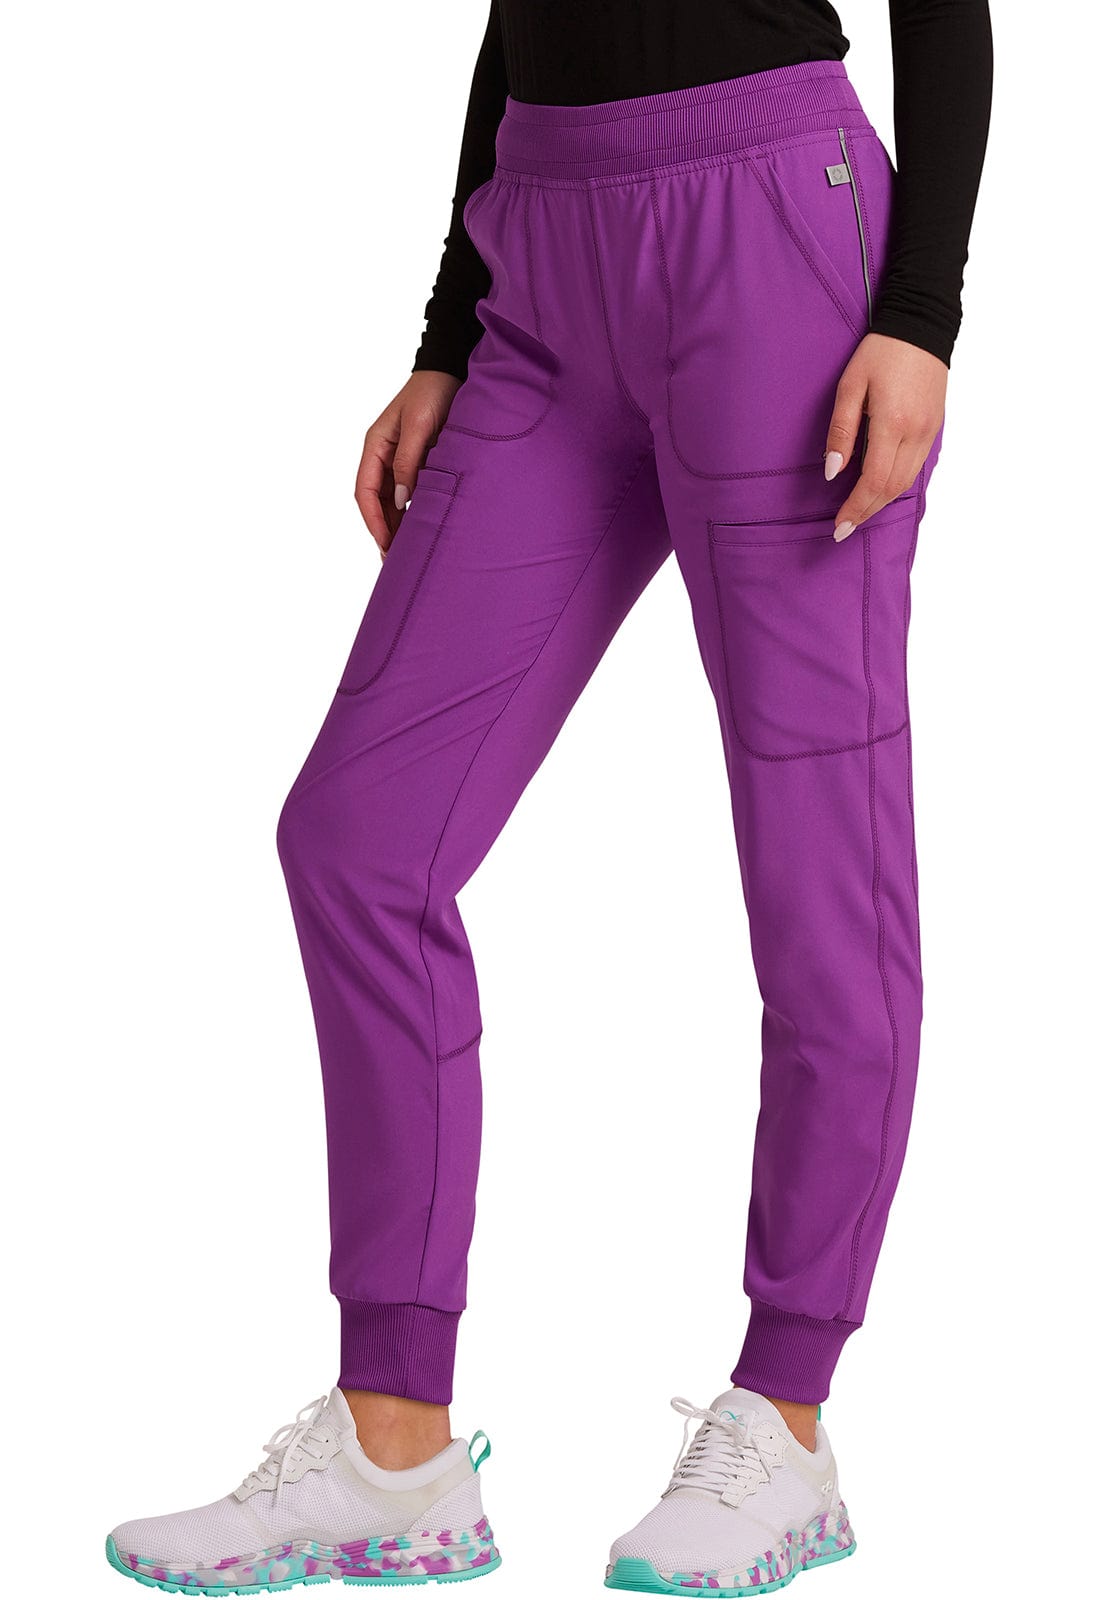 Infinity Mid Rise Jogger Bright Violet CK080A – Beauty & Spa Uniforms NZ